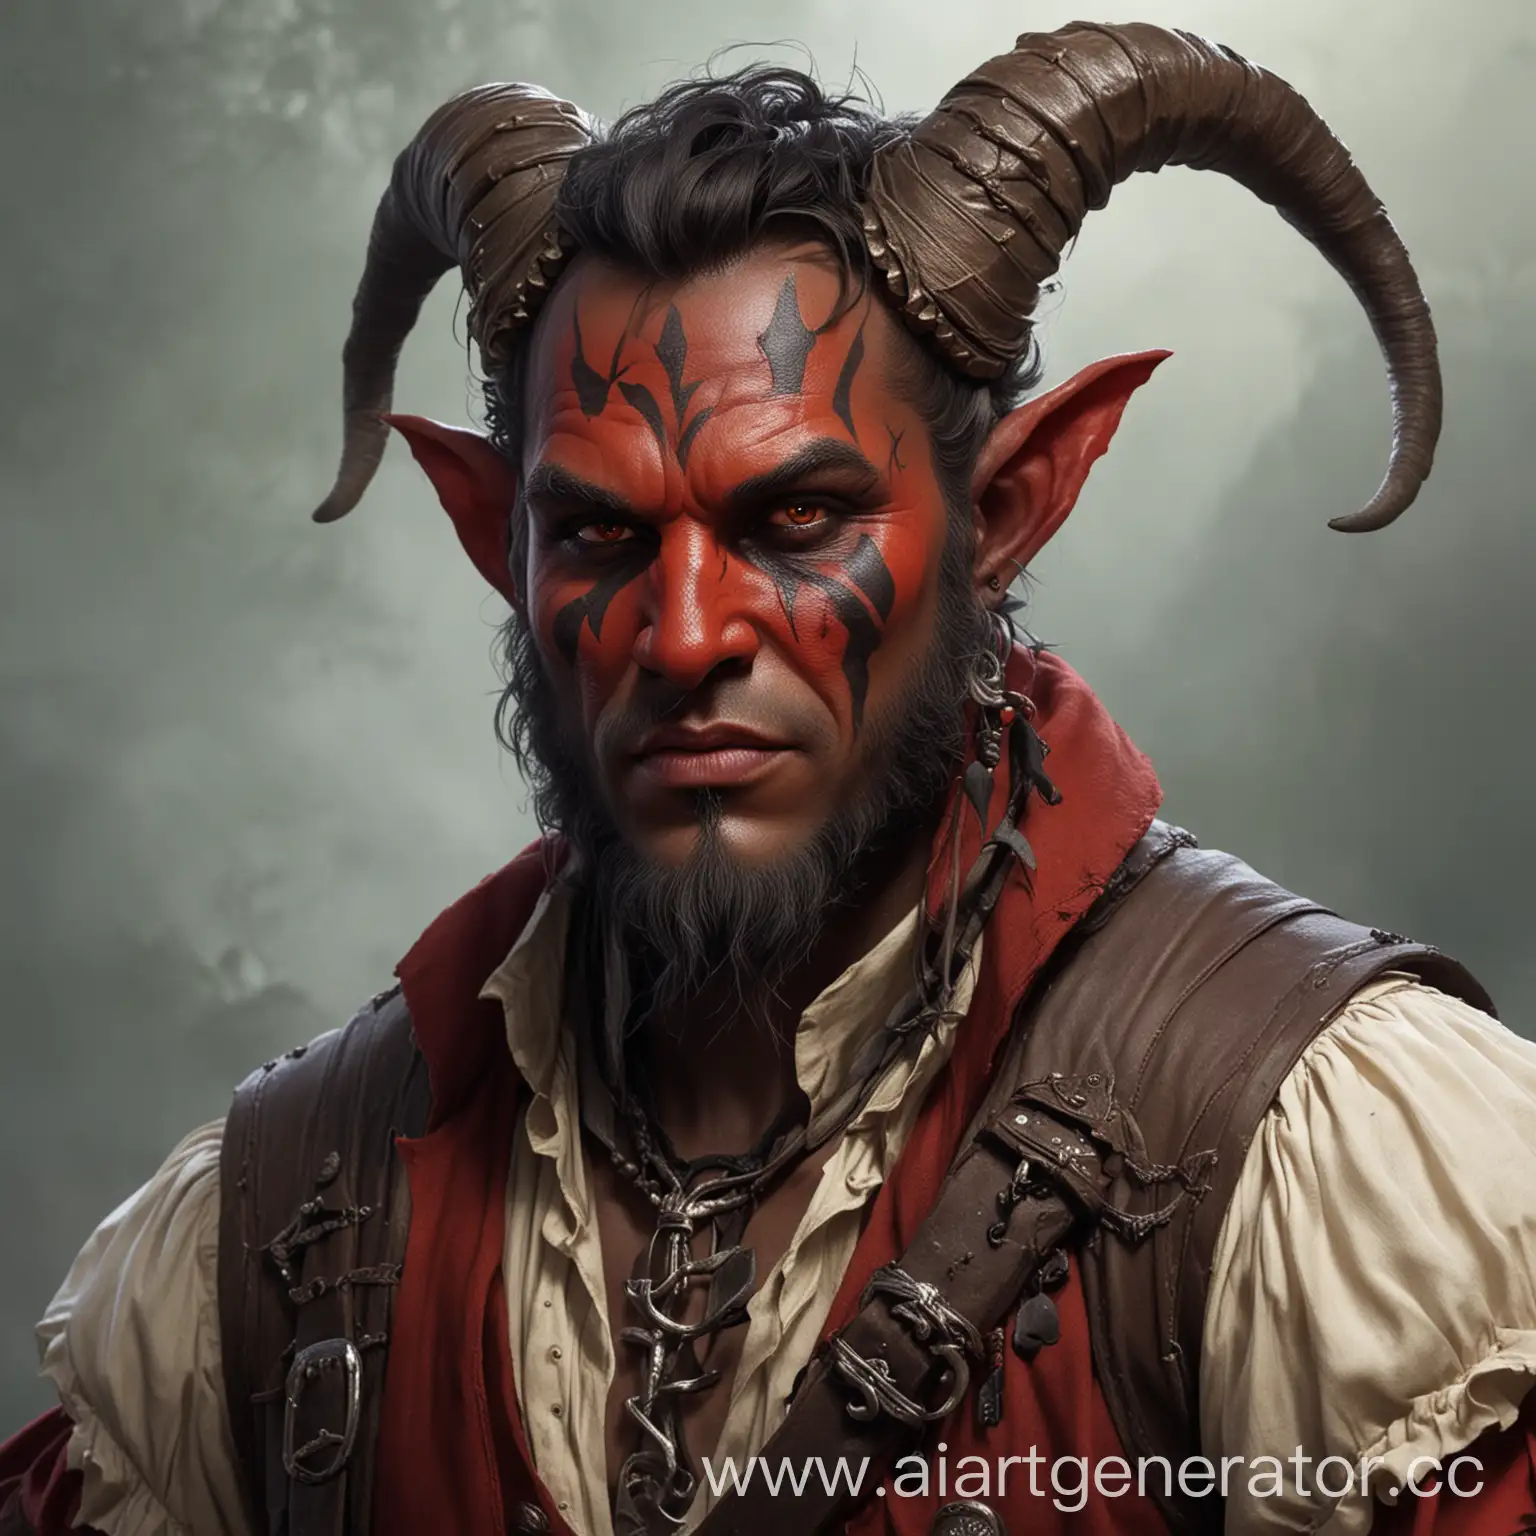 Tiefling-Bard-with-Black-Horns-and-Red-Skin